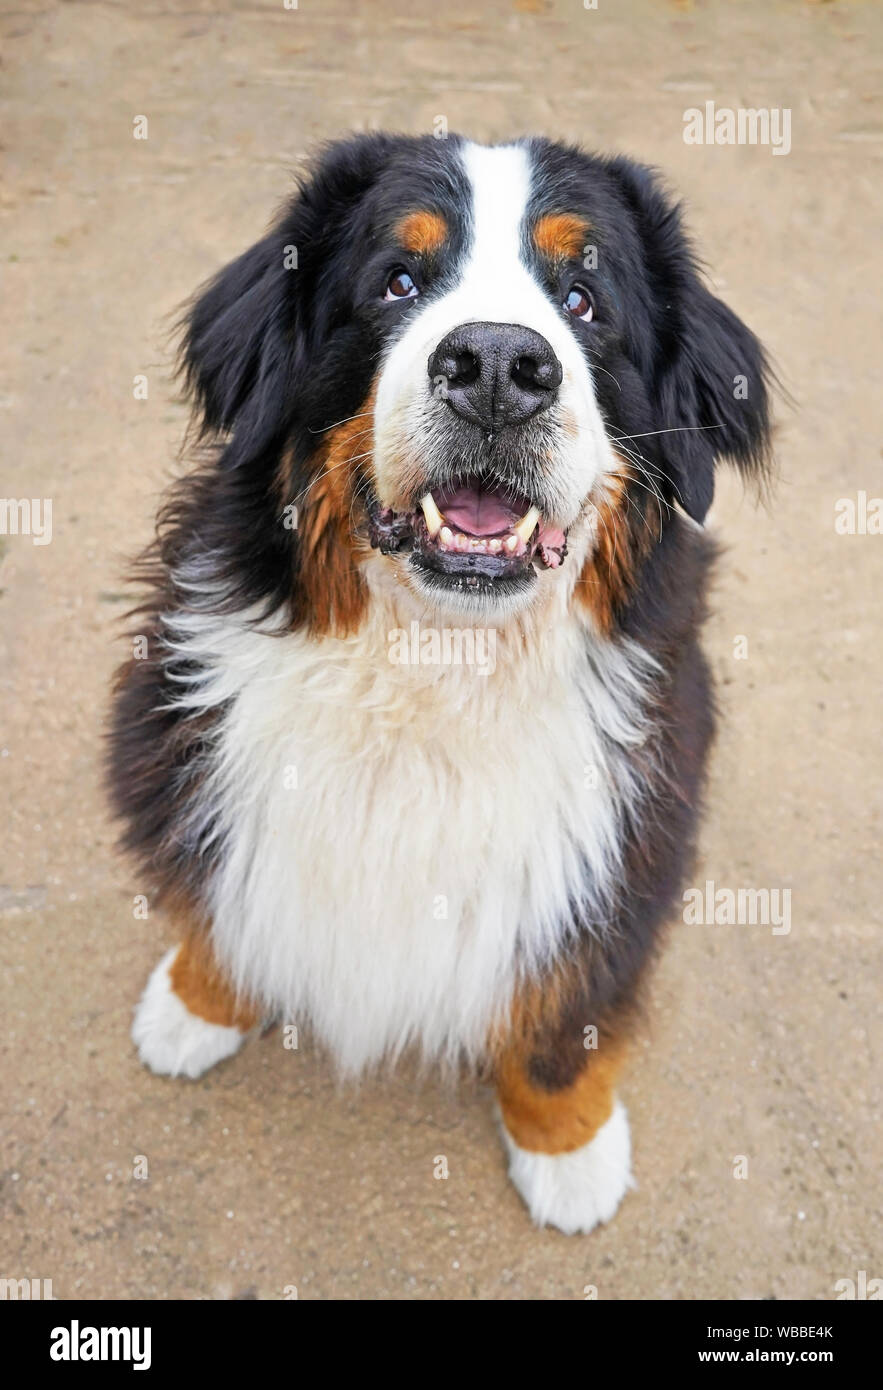 The portrait of the Bernese Mountain Dog, sitting on the patio, looking up at the camera, his mouth slightly open. Stock Photo